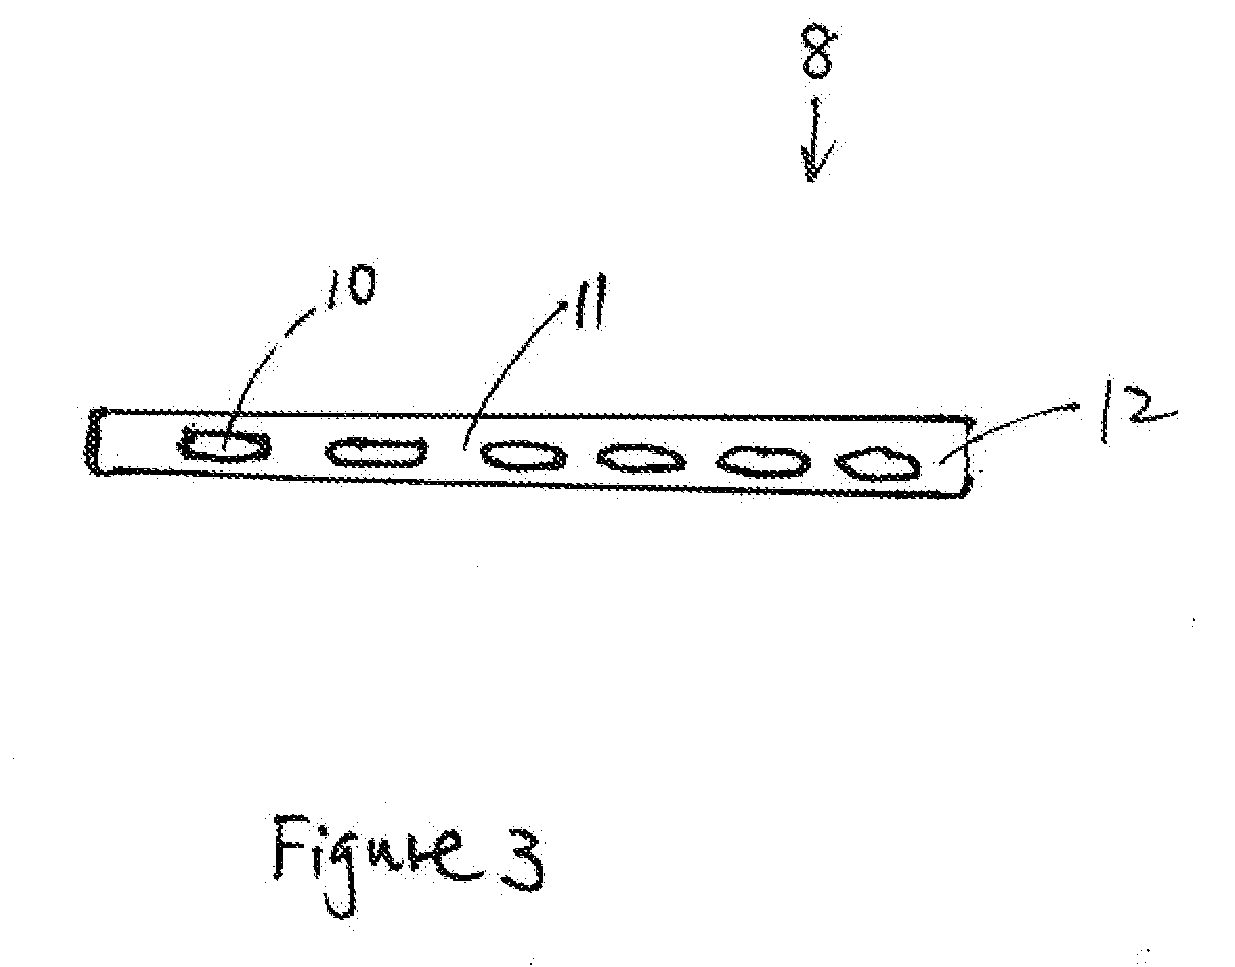 Fiduciary Markers and Method of Use thereof